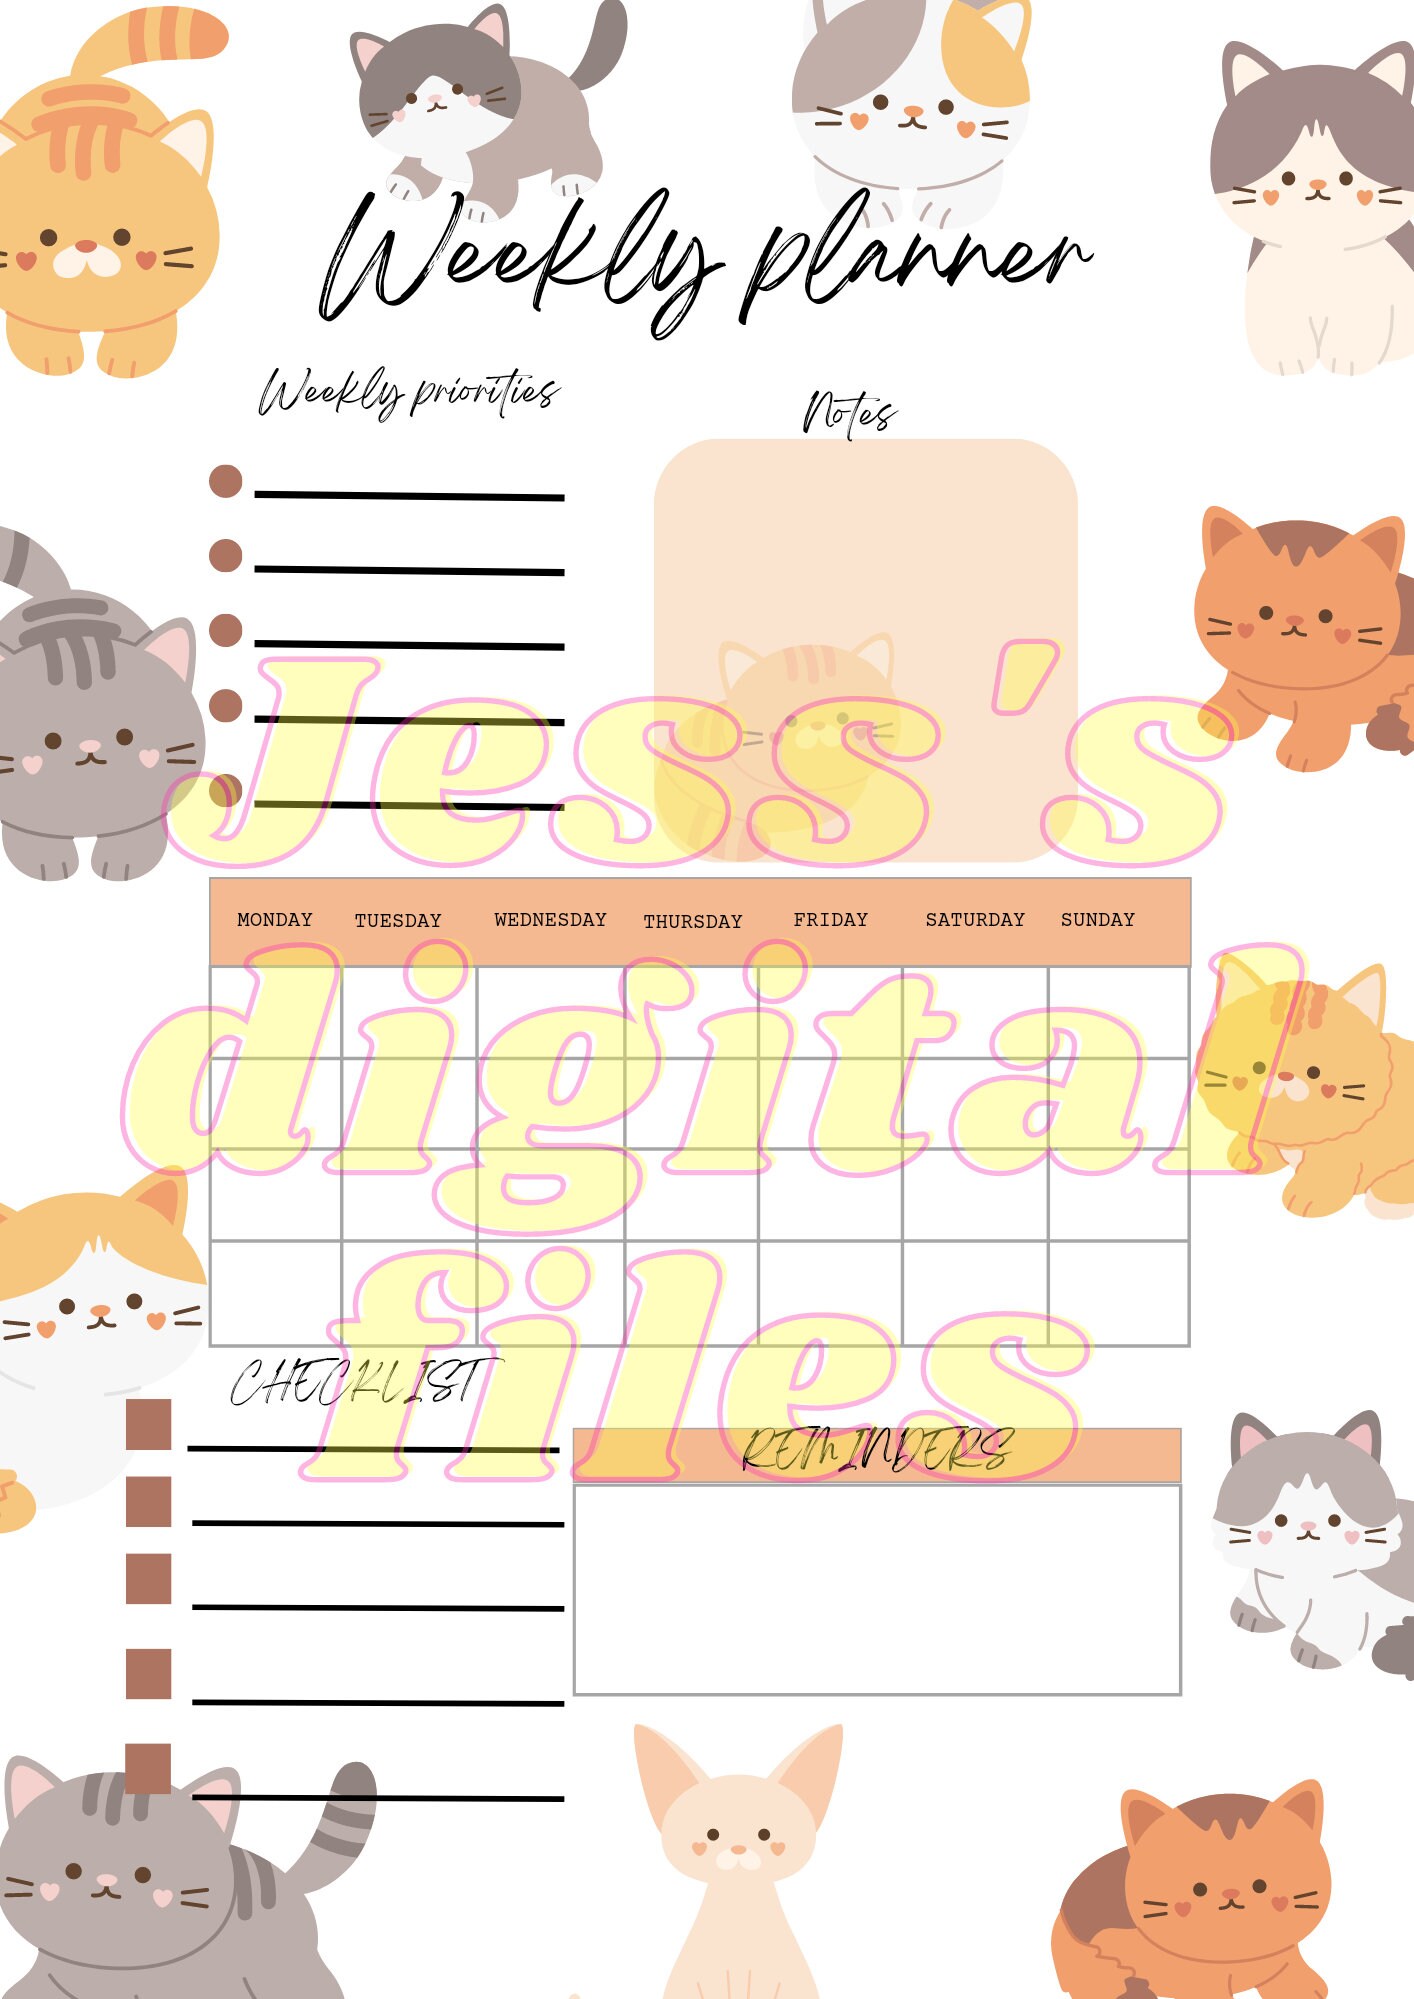 Grab my free printable daily planner pages with a gorgeous cat theme!